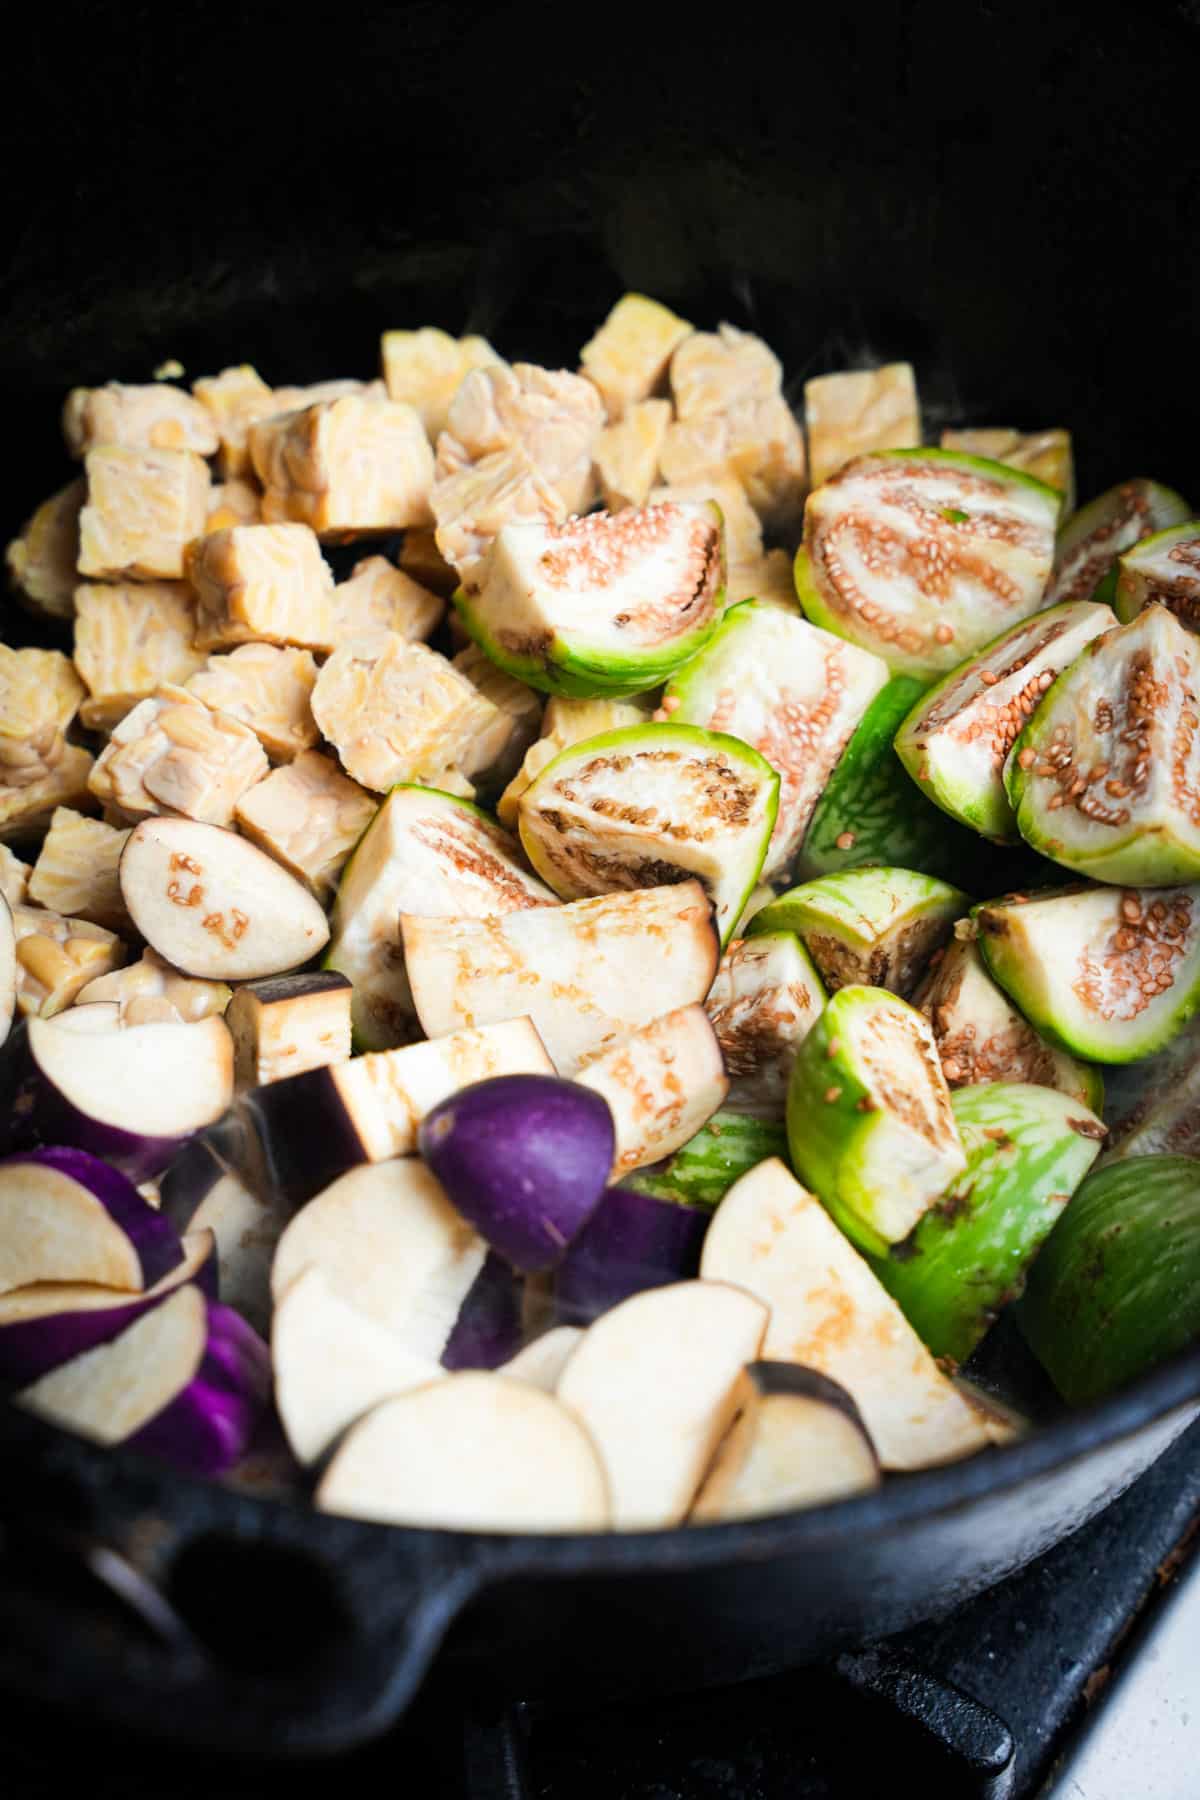 Tempeh, thai eggplant, and chinese eggplant are cooked in a cast iron dutch oven.